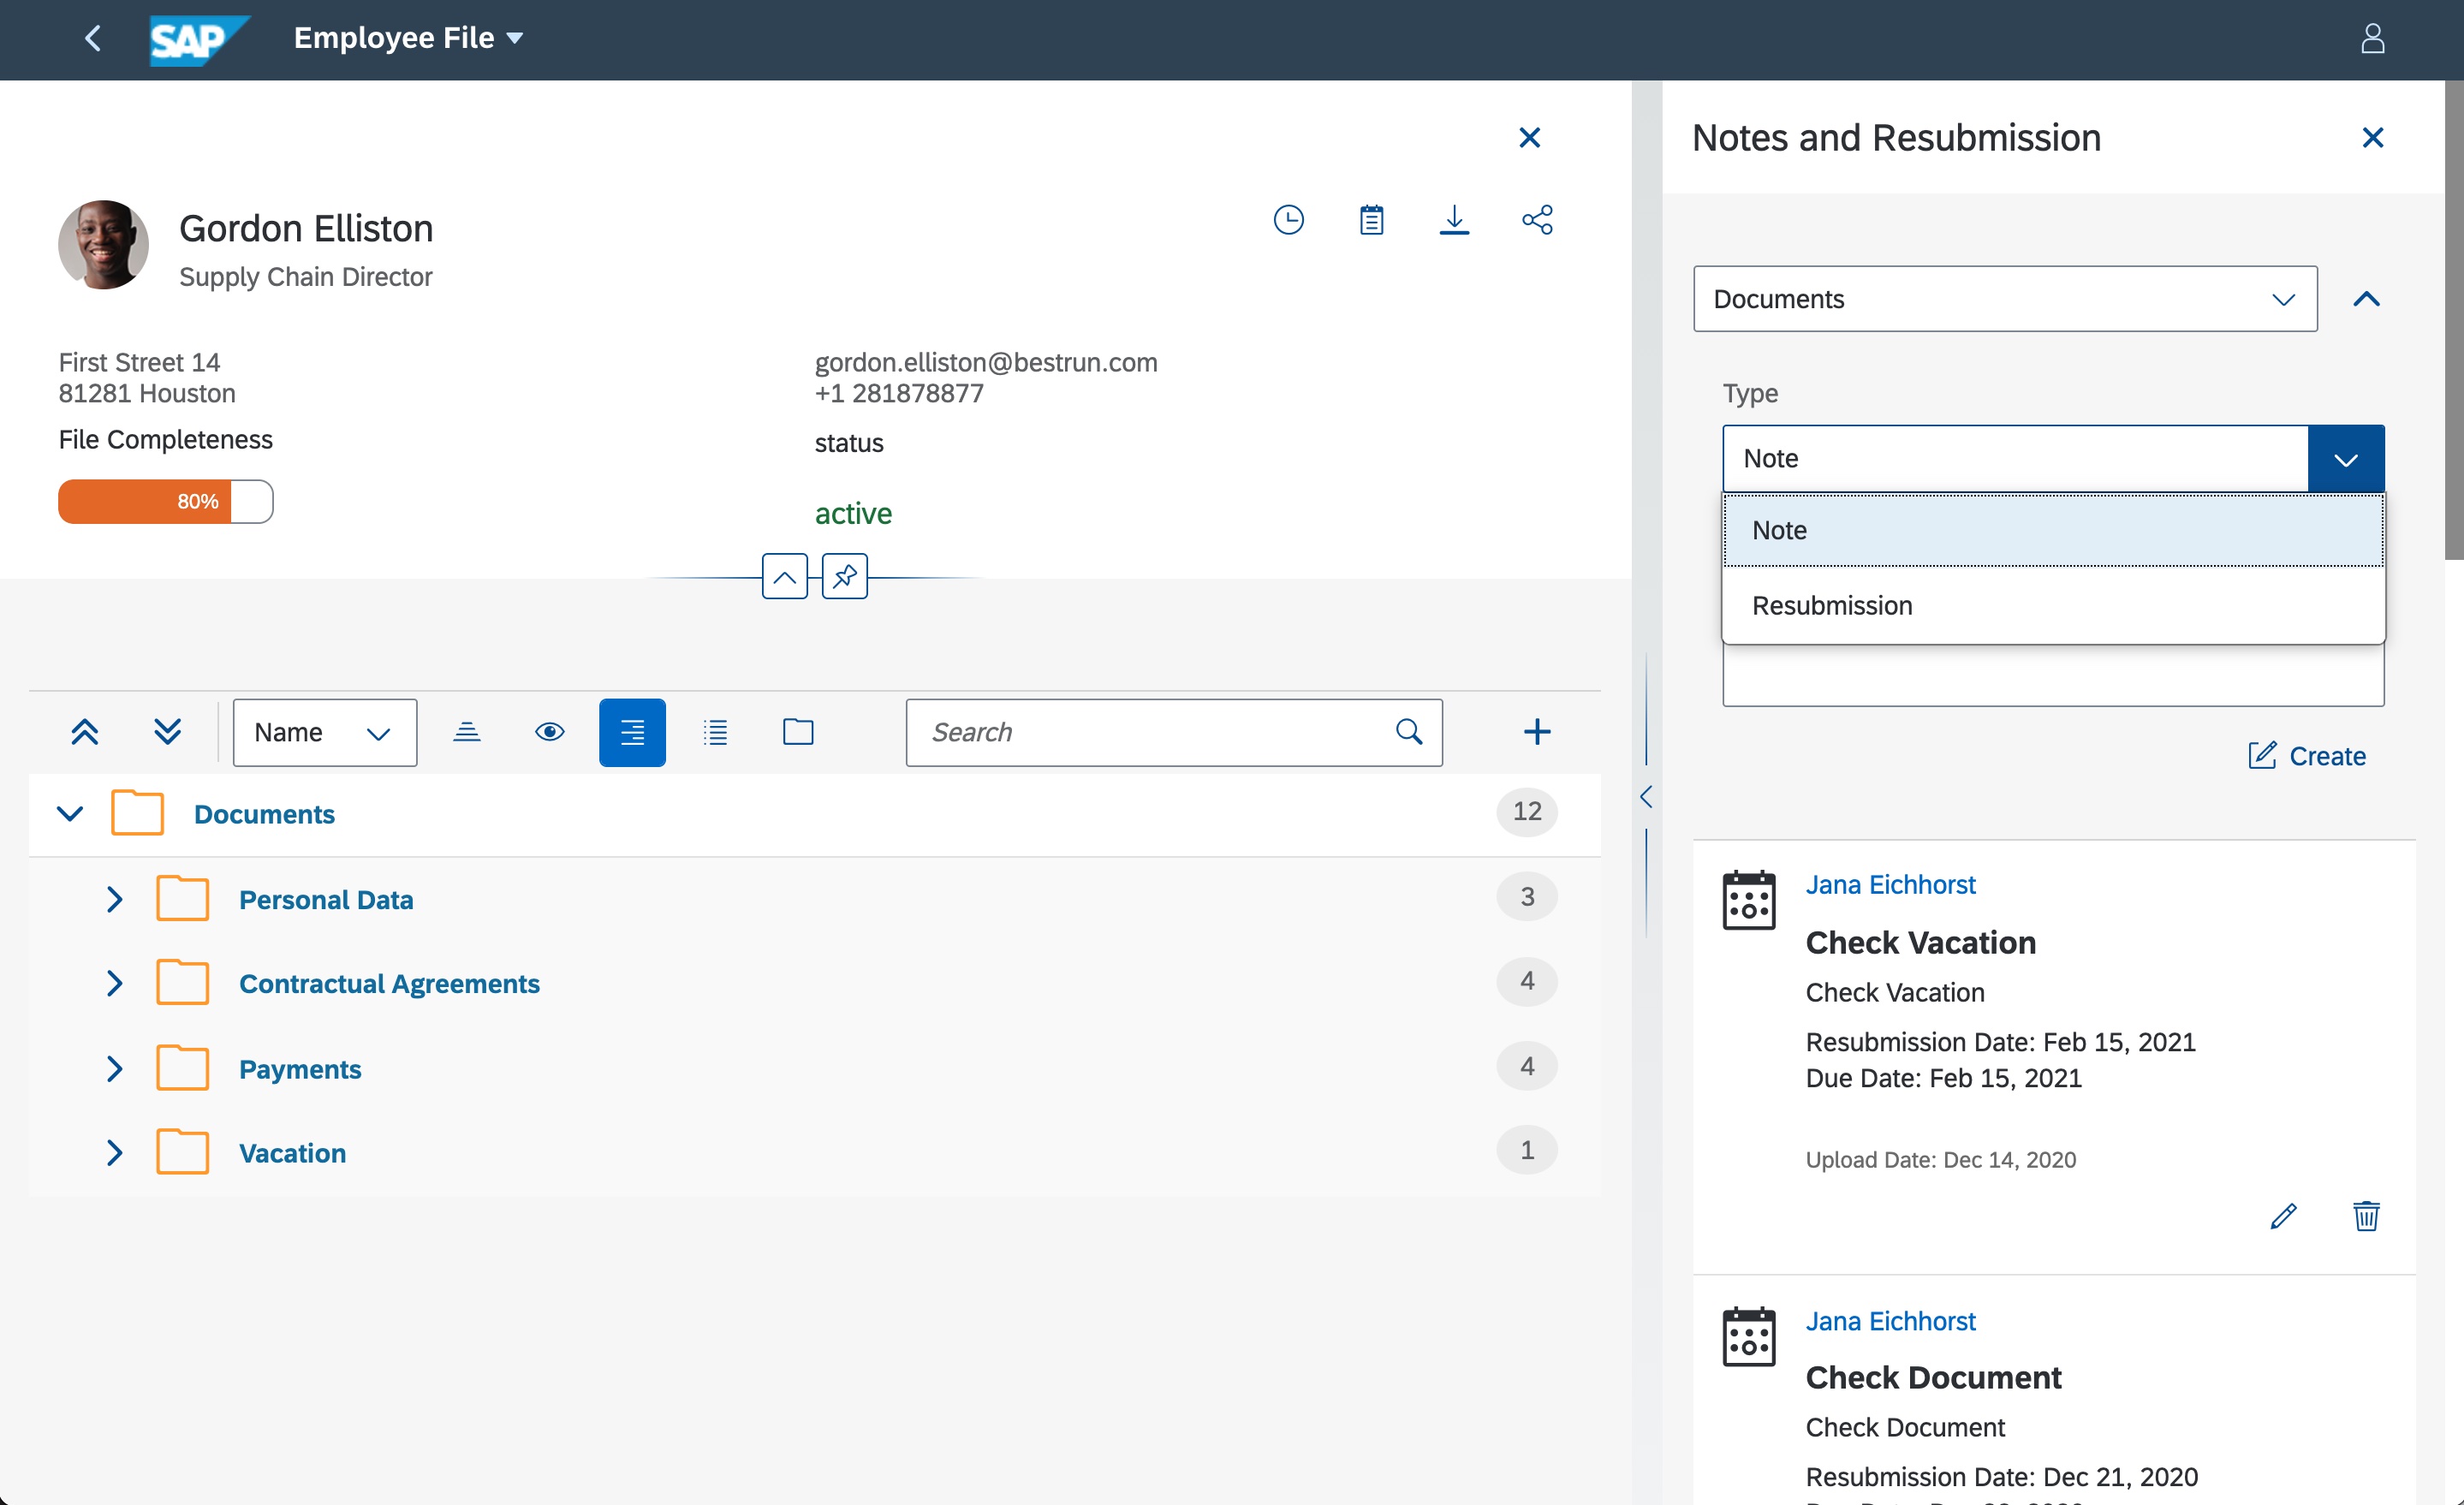 Strengthen your processes and support workflows with notifications and reminders.